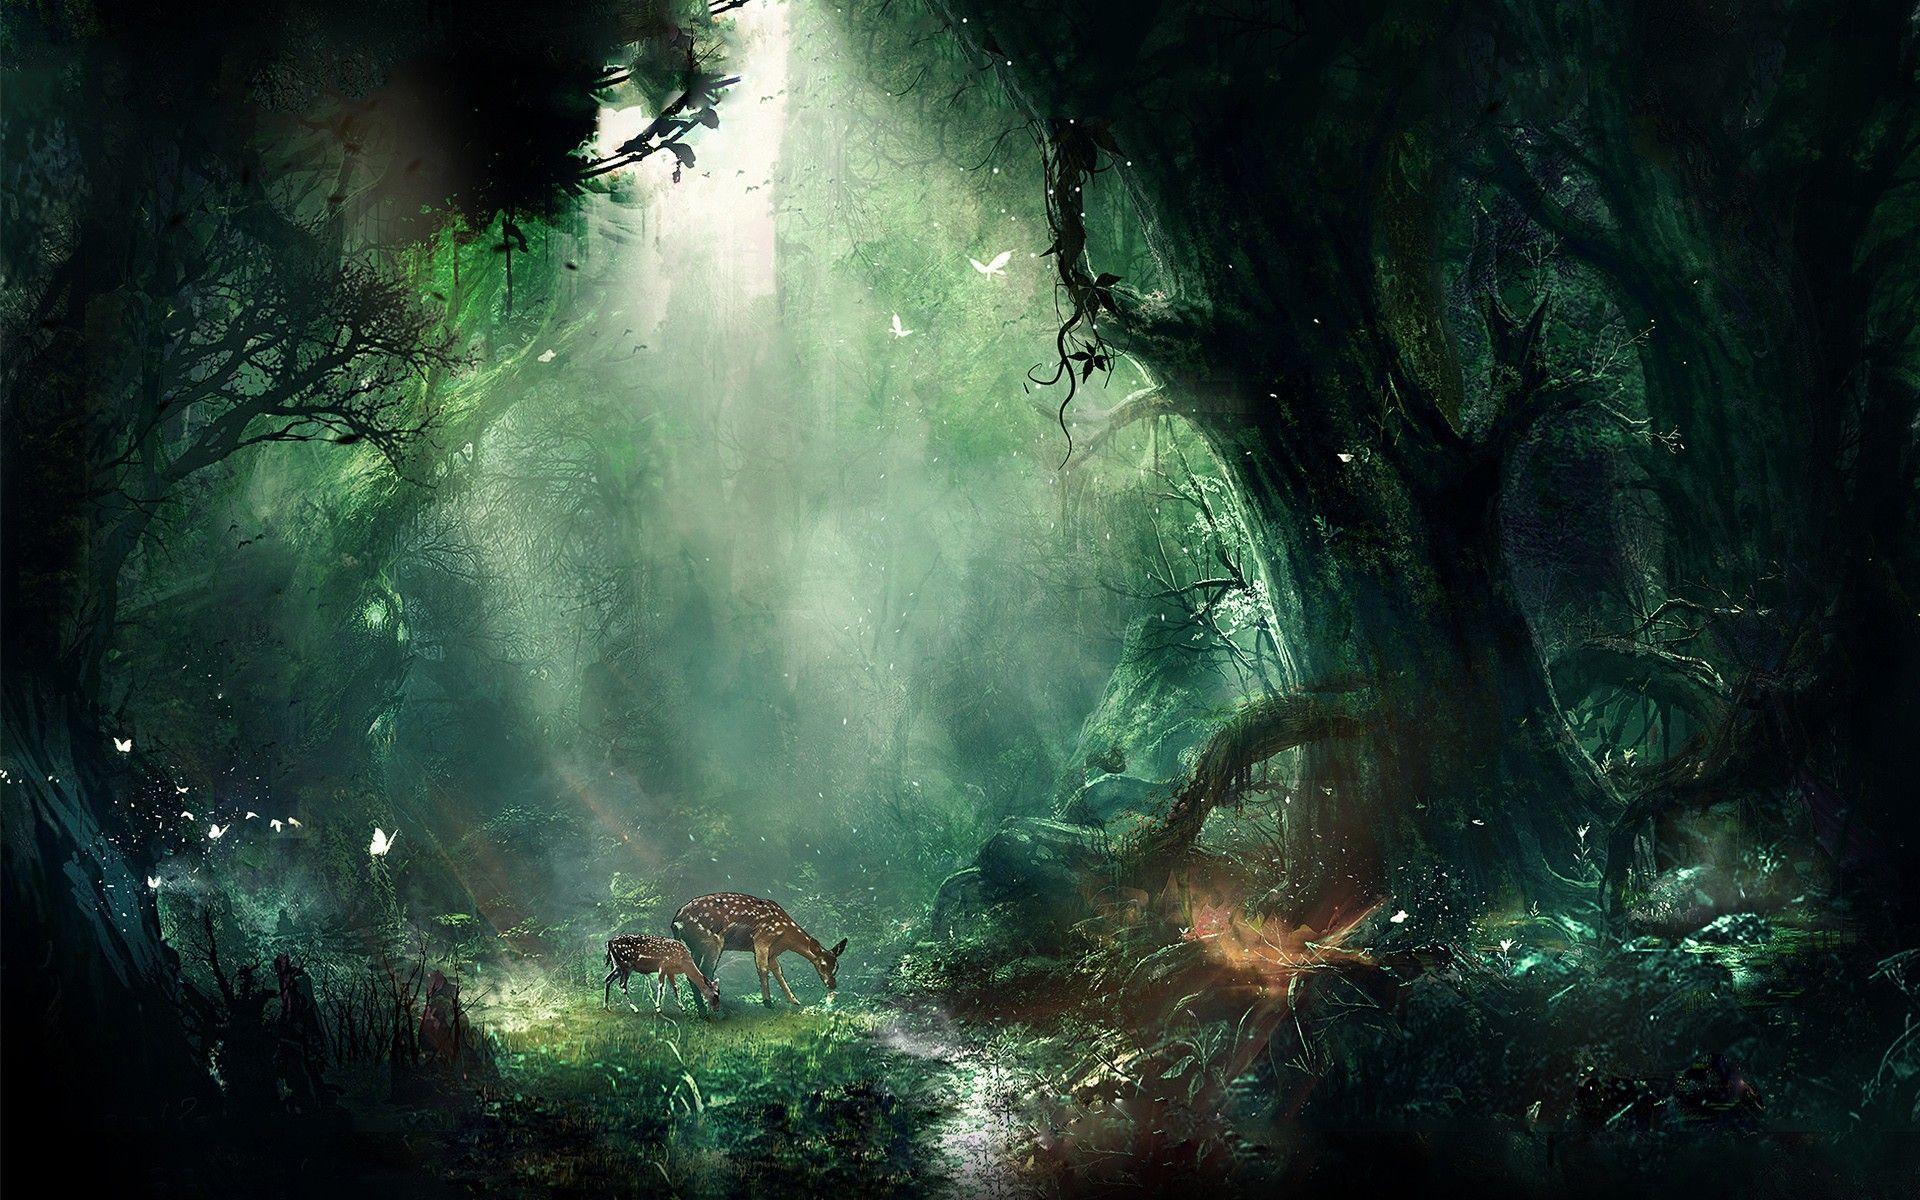 Magic Forest Wallpapers Top Free Magic Forest Backgrounds